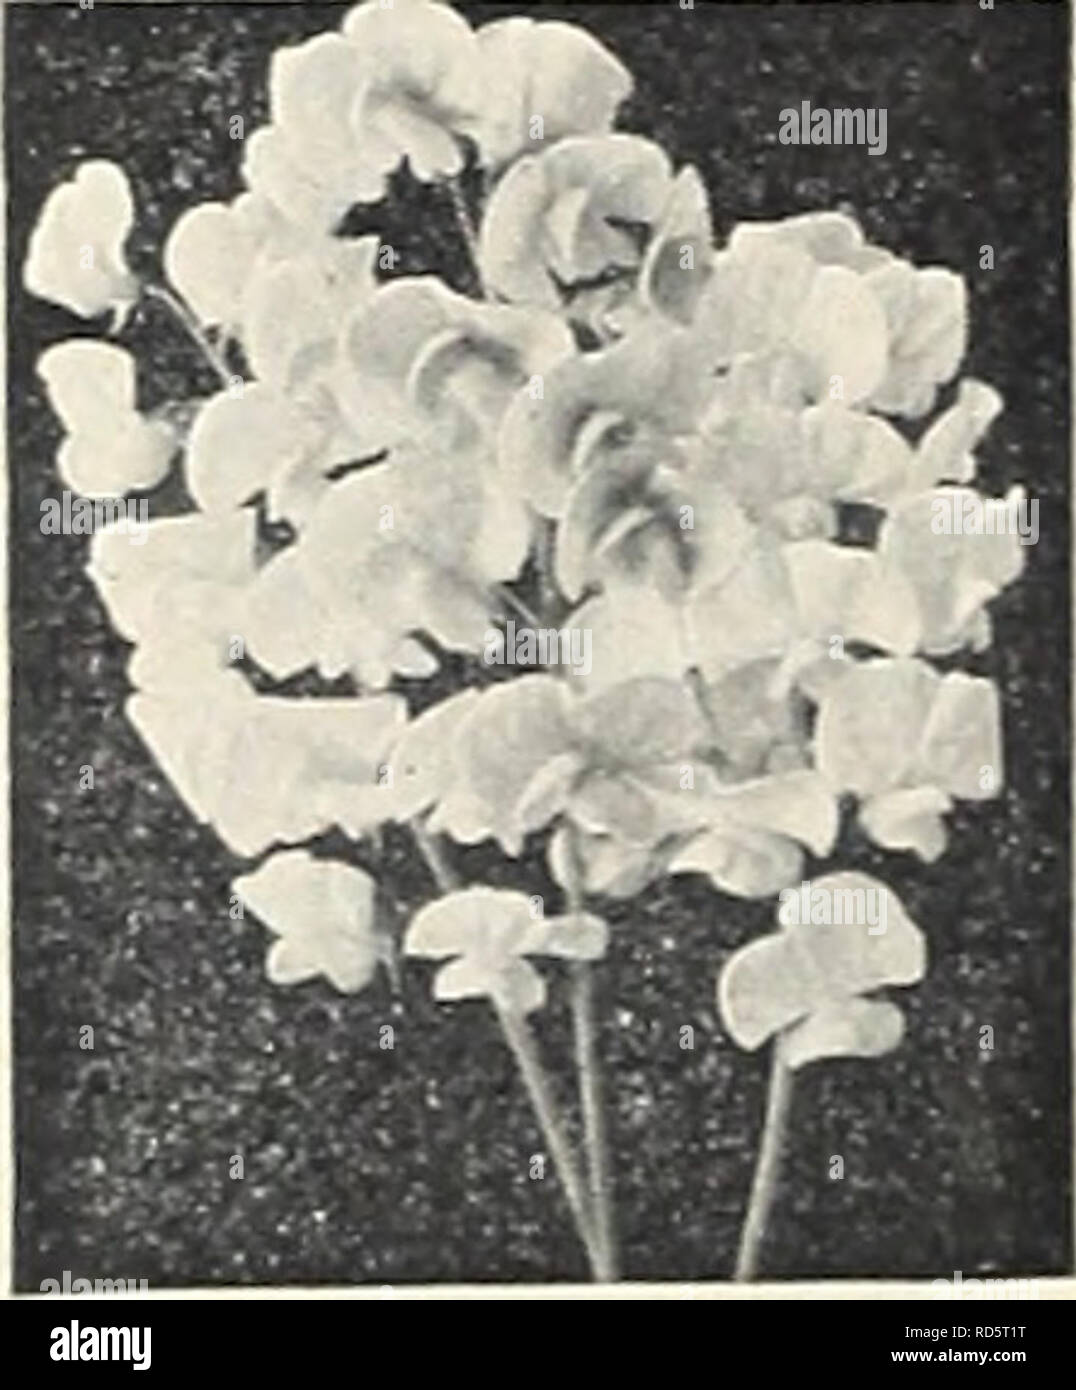 . Currie's garden annual. Flowers Seeds Catalogs; Bulbs (Plants) Seeds Catalogs; Vegetables Seeds Catalogs; Nurseries (Horticulture) Catalogs; Plants, Ornamental Catalogs; Gardening Equipment and supplies Catalogs. mm HELIANTHEMUM (Rock, or Sun Rose) MUTABILE—Low growing, ever- green plants about 12&quot; high, forming broad clumps, quite hid- den by a mass of bloom. Choice mixed varieties. Plants, 25c; seeds, 1/4 01., 40c; Pkt., 10c.. LATHYRUS LATIFOLIUS I Perennial Sweet Pea* A hardy vine, valuable for cov- ering fences, etc. Pink, Crimson, White, Mixed. 1/4 01., 25c; Pkt., 10c. HEUCHERA I A Stock Photo